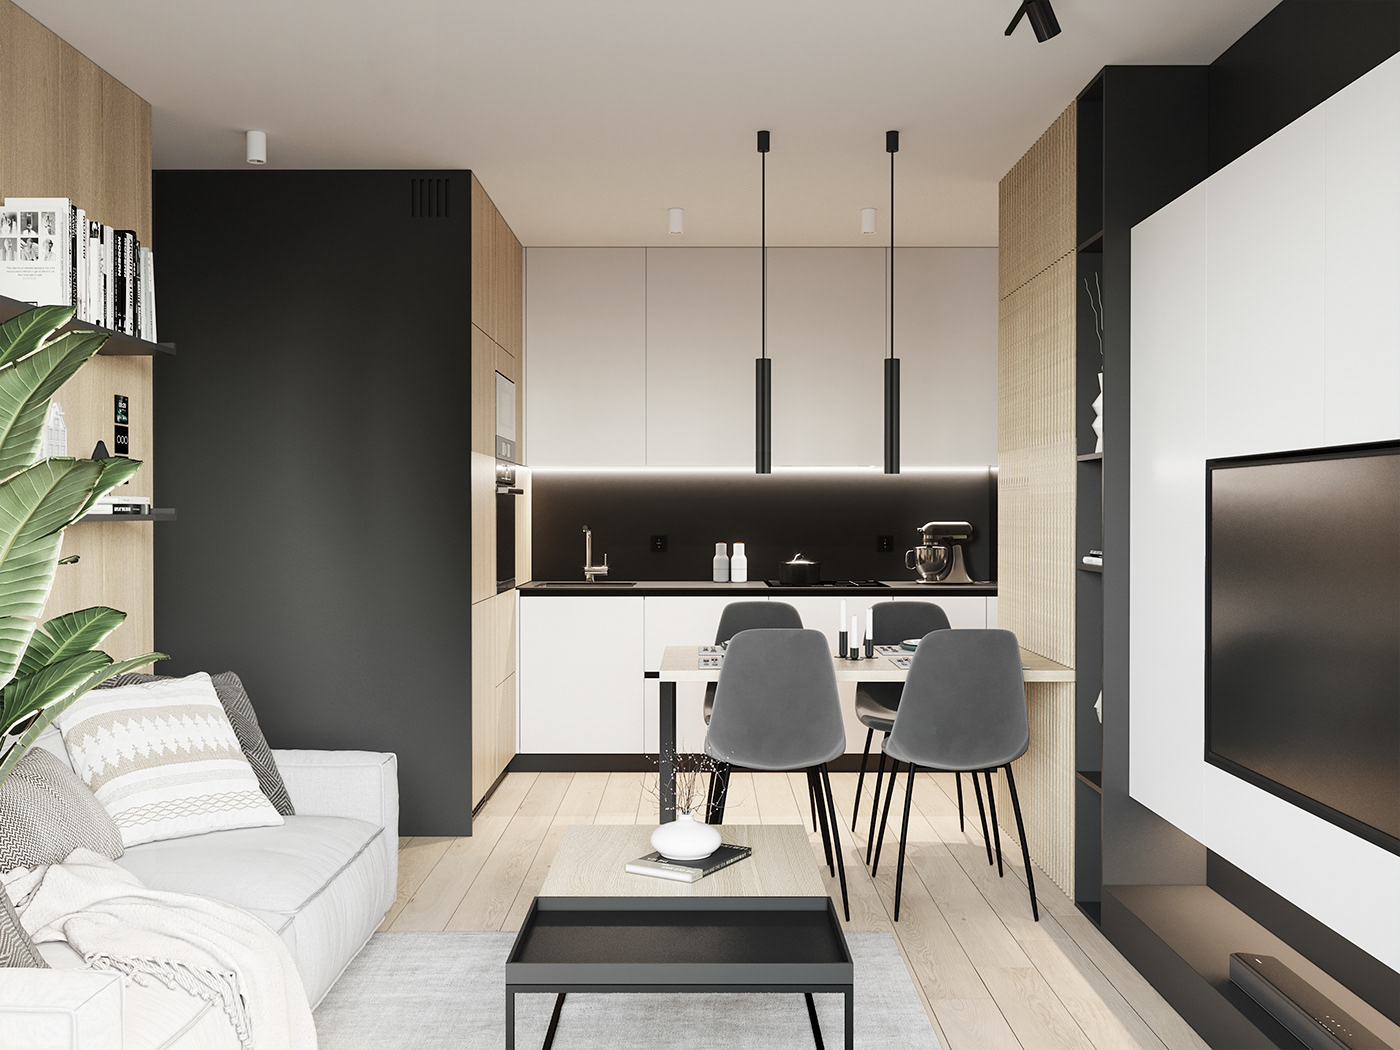 Colors of the apartment and the interior are in harmony with each other. Furniture are reasonably arranged to create an open space while maintaining privacy in each area.